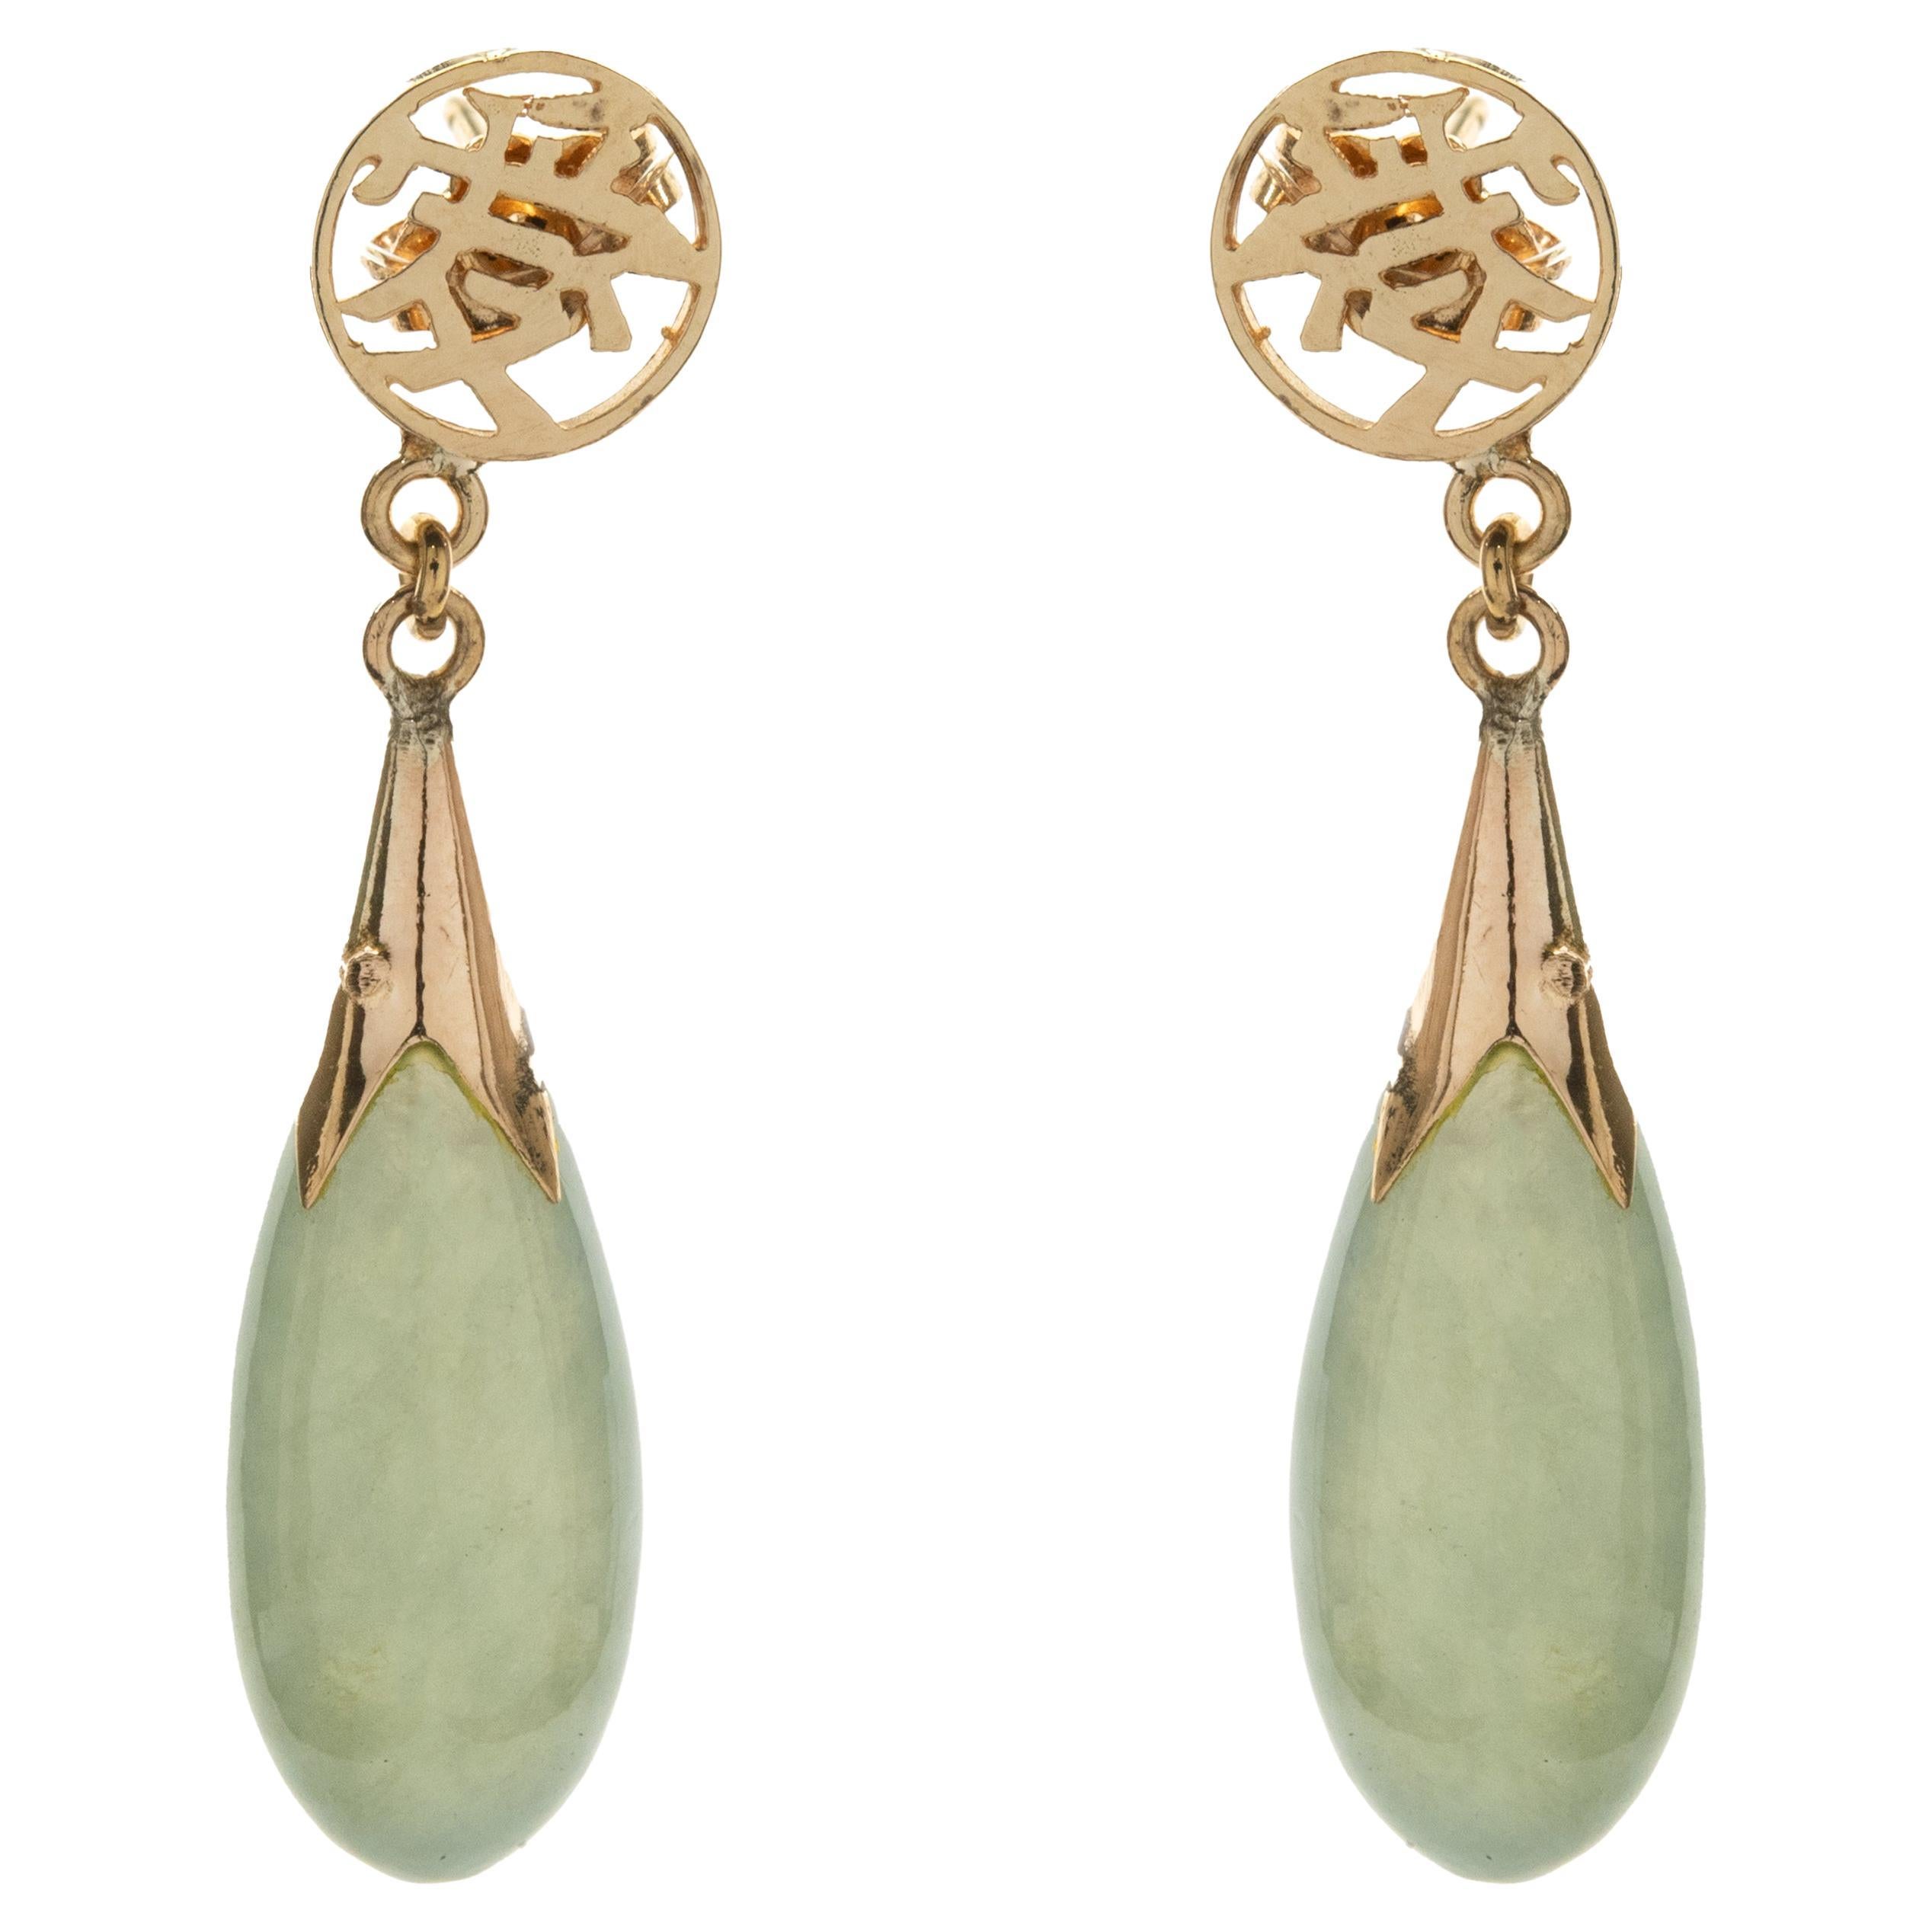 14 Karat Yellow Gold Vintage Jade Drop Earrings with Asian Style Writing